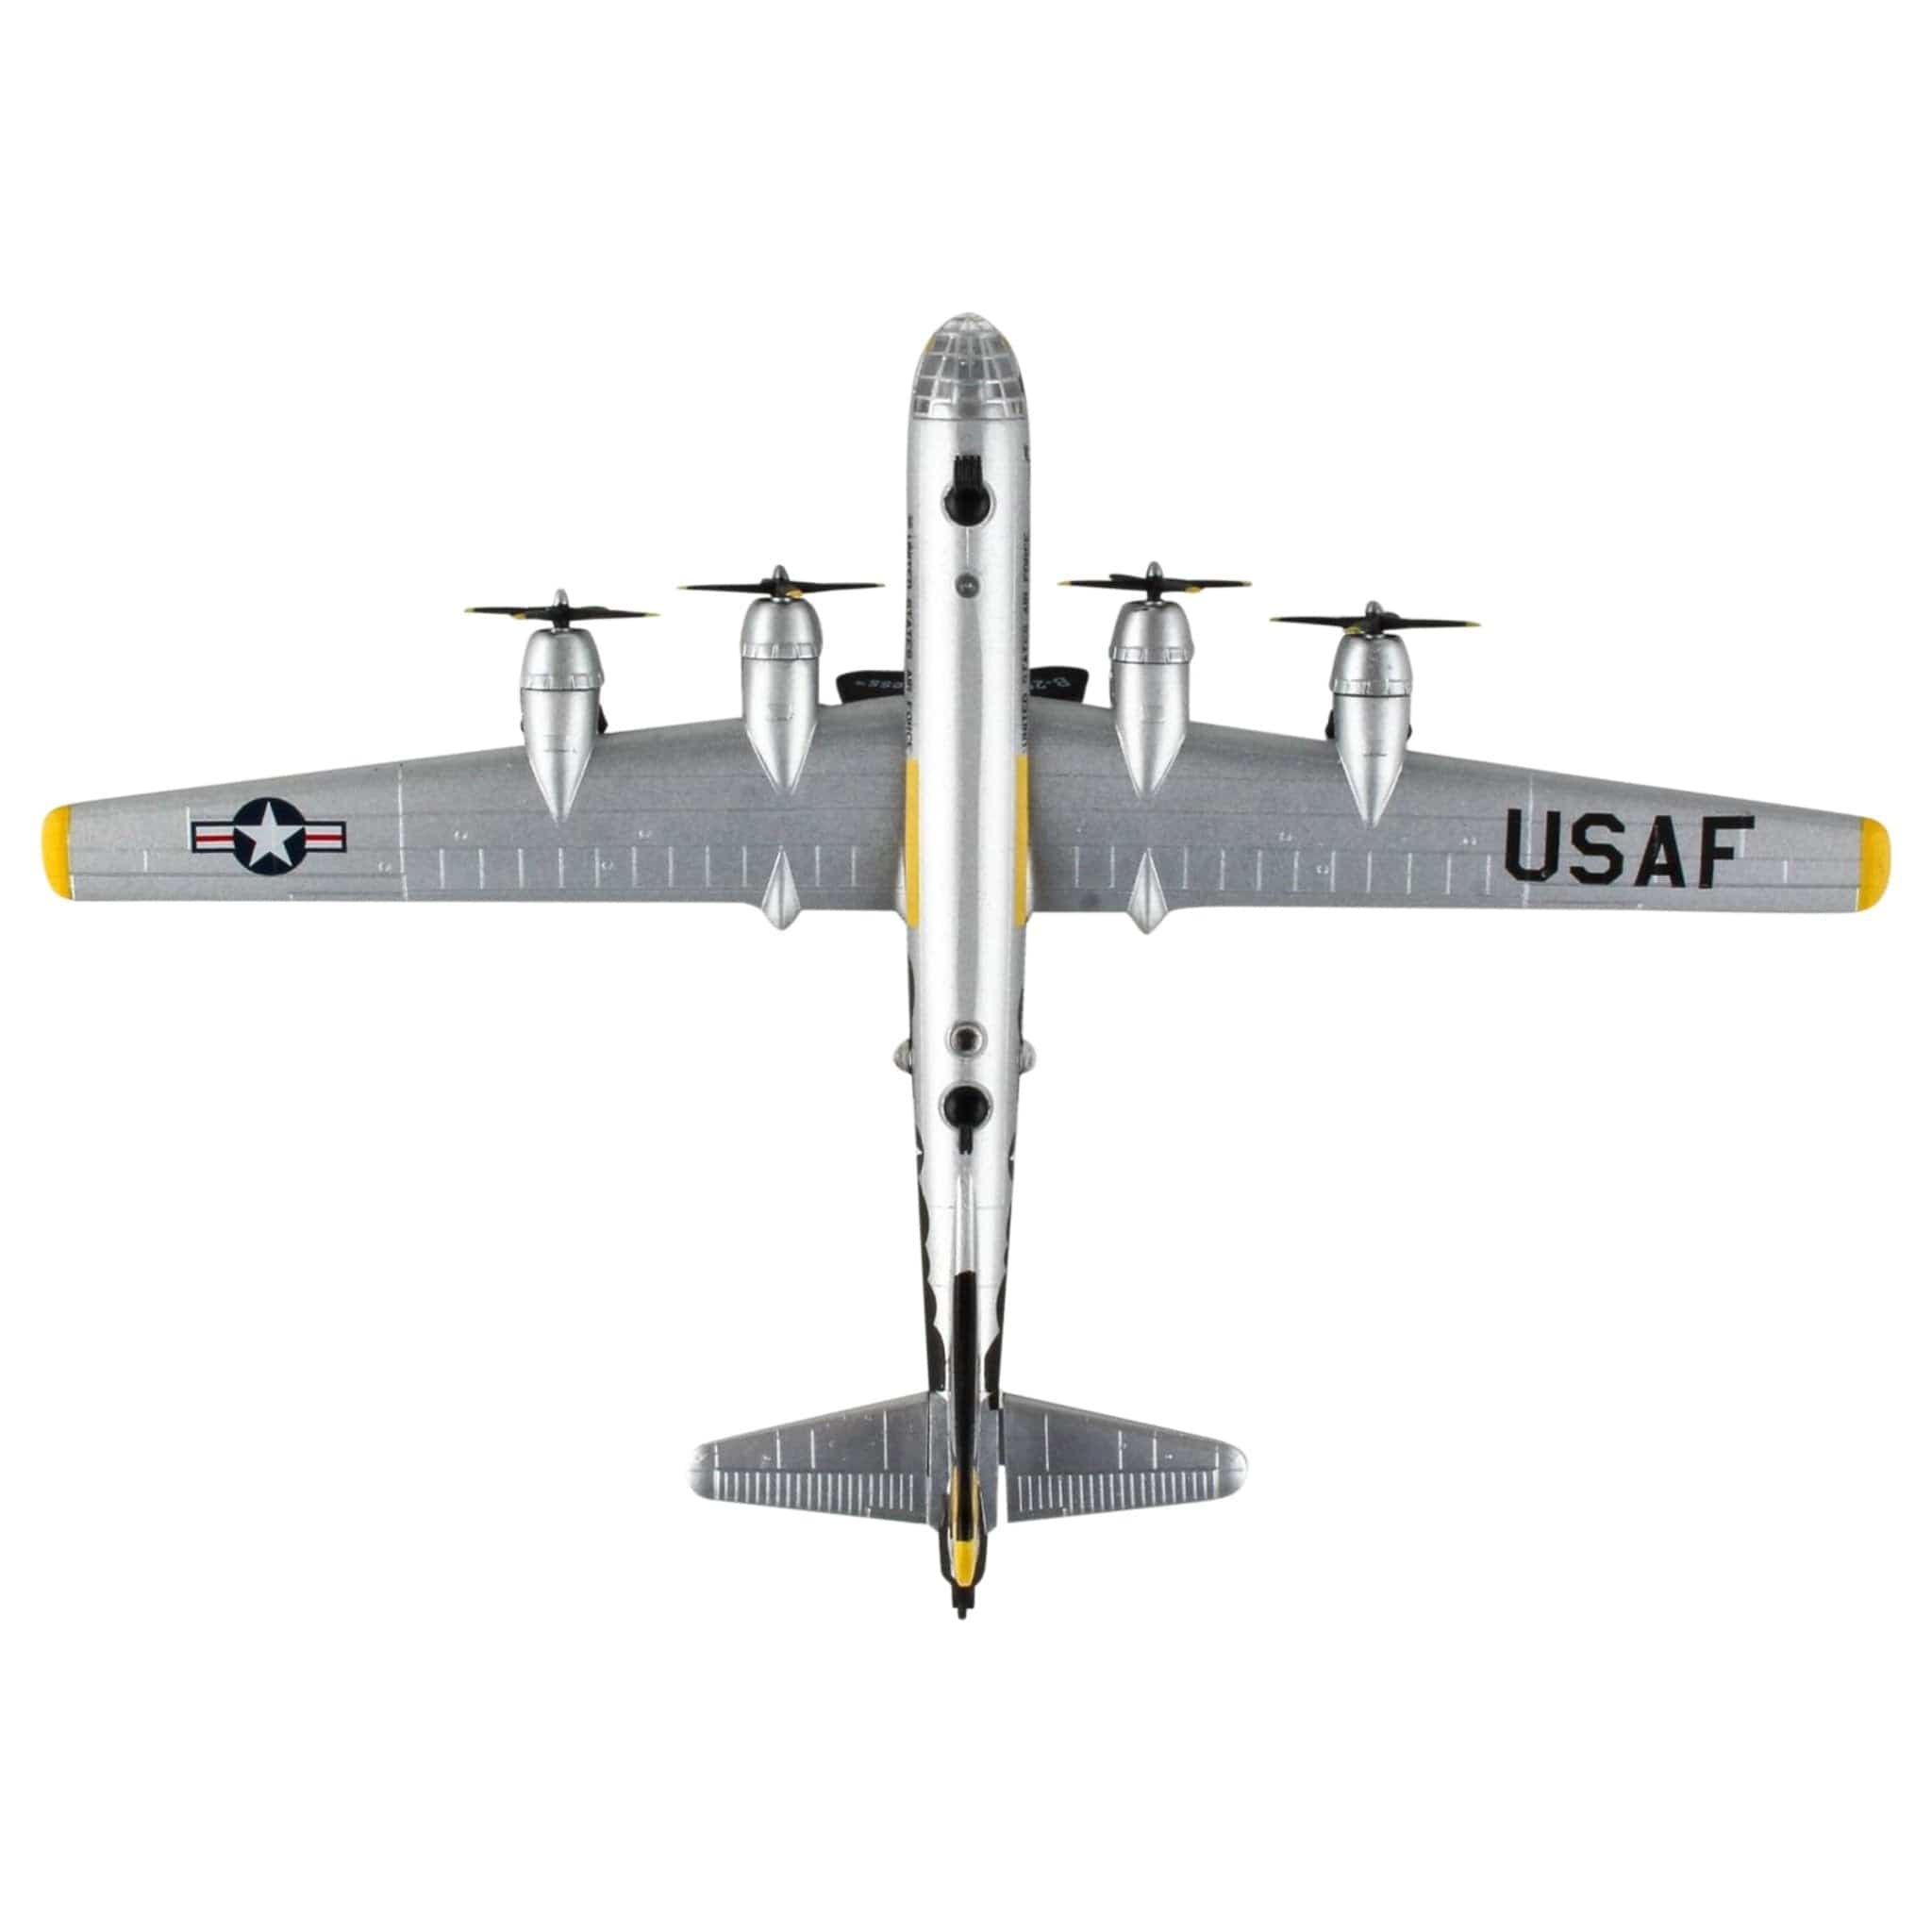 Postage Stamp B-29 Superfortress 1/200 Hawg Wild Die-Cast Metal Model Aircraft